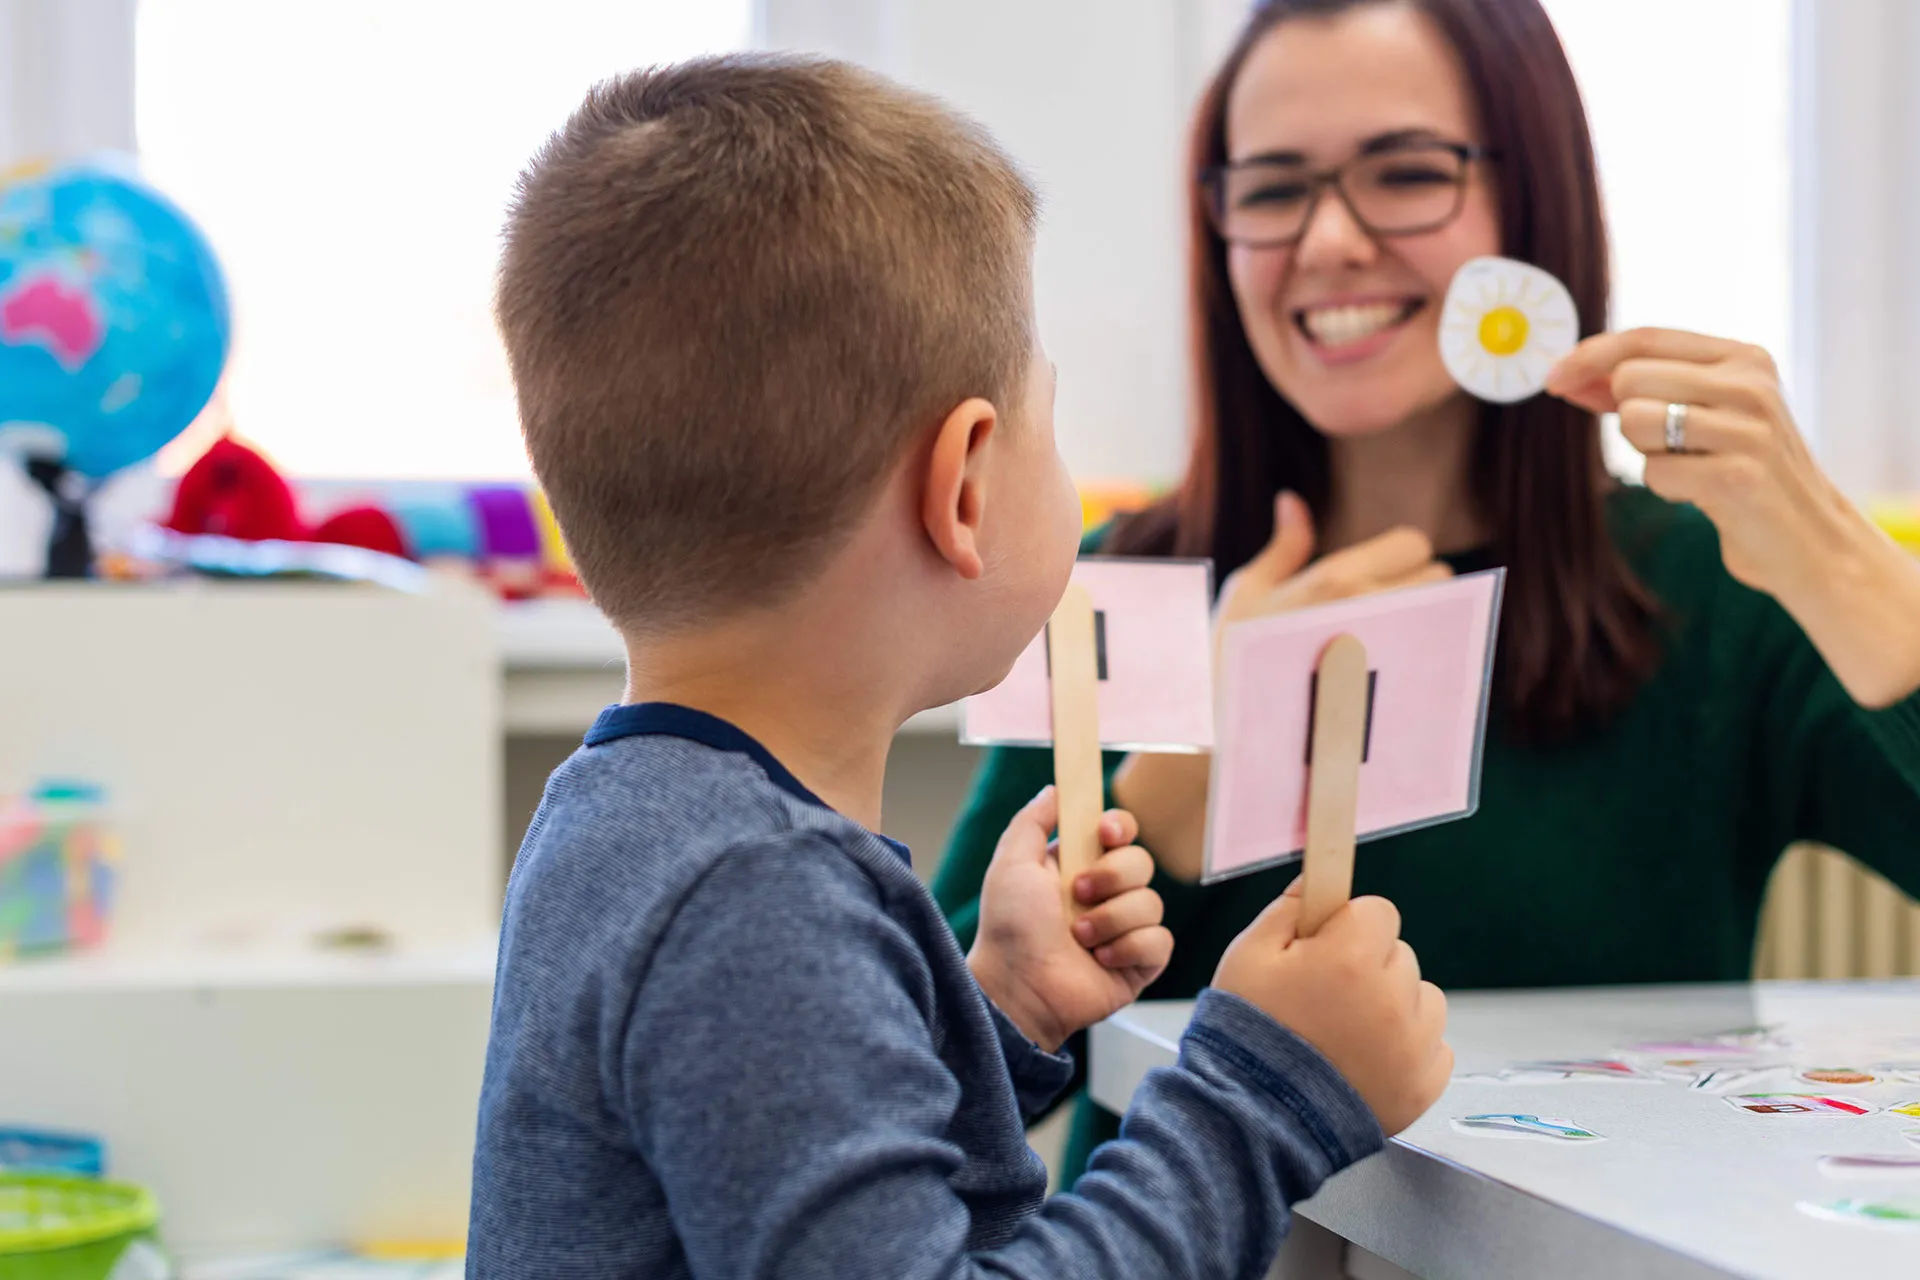 Children's Speech Pathology Appointments now available